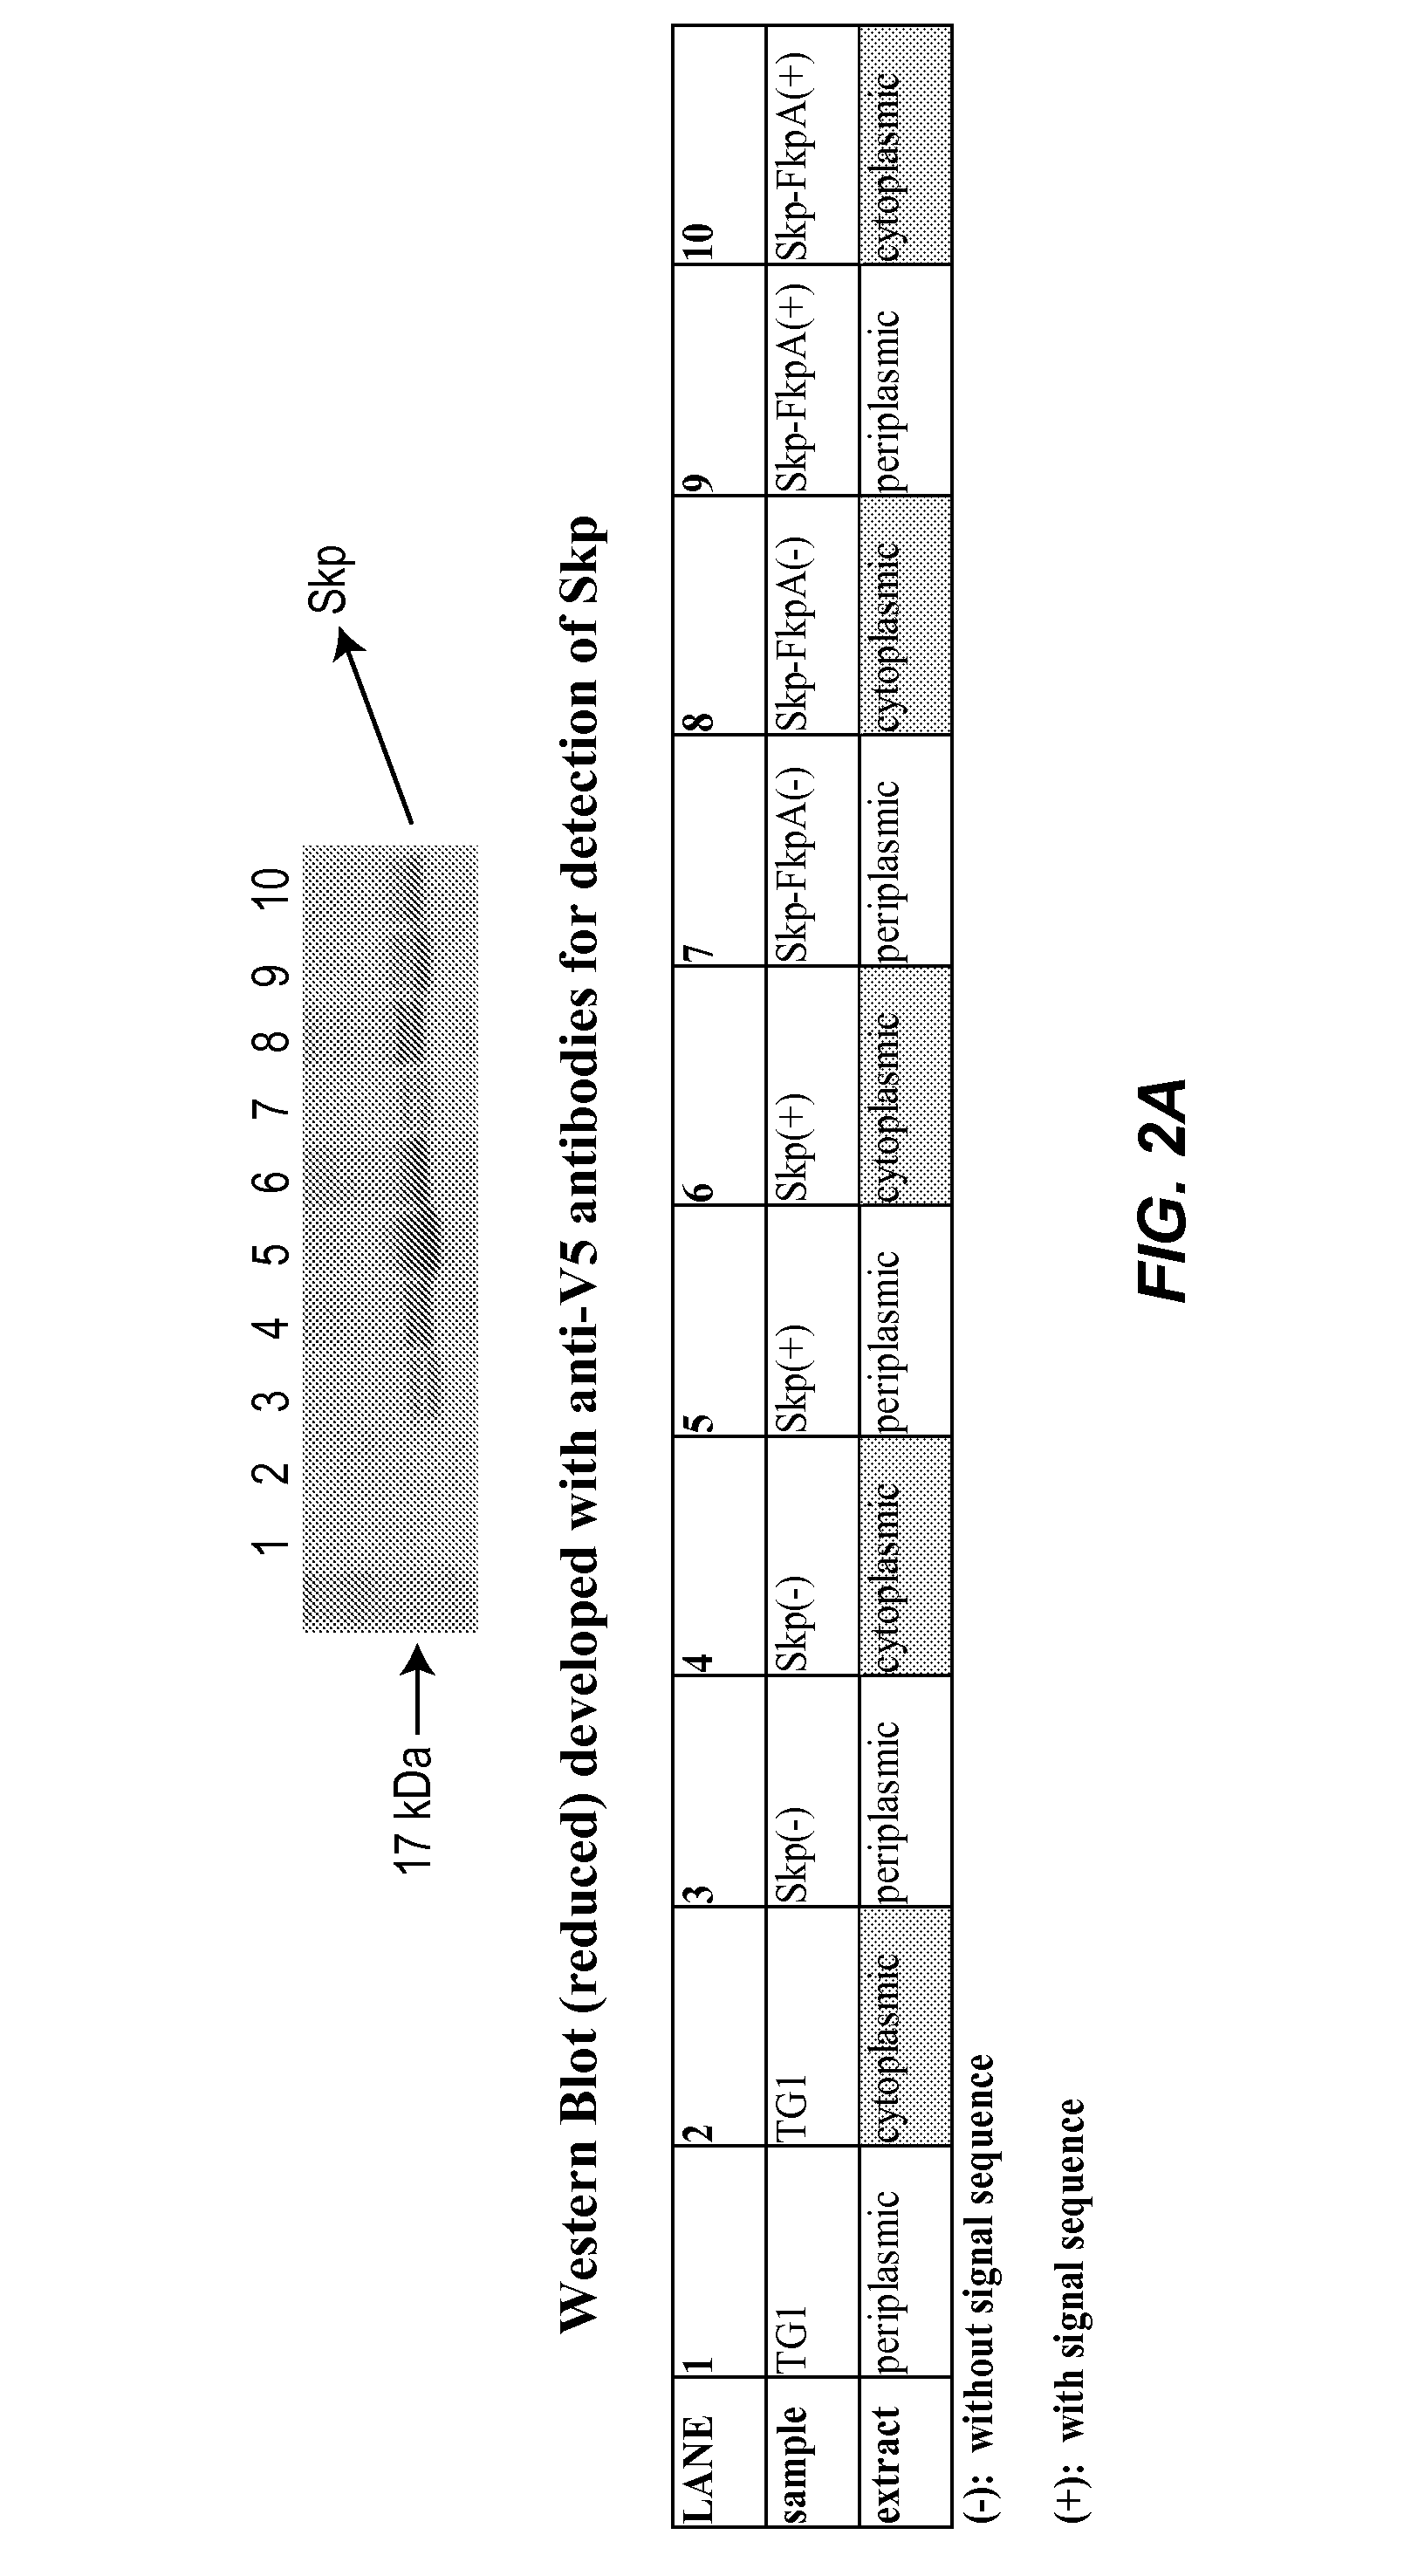 Methods and materials for enhancing functional protein expression in bacteria